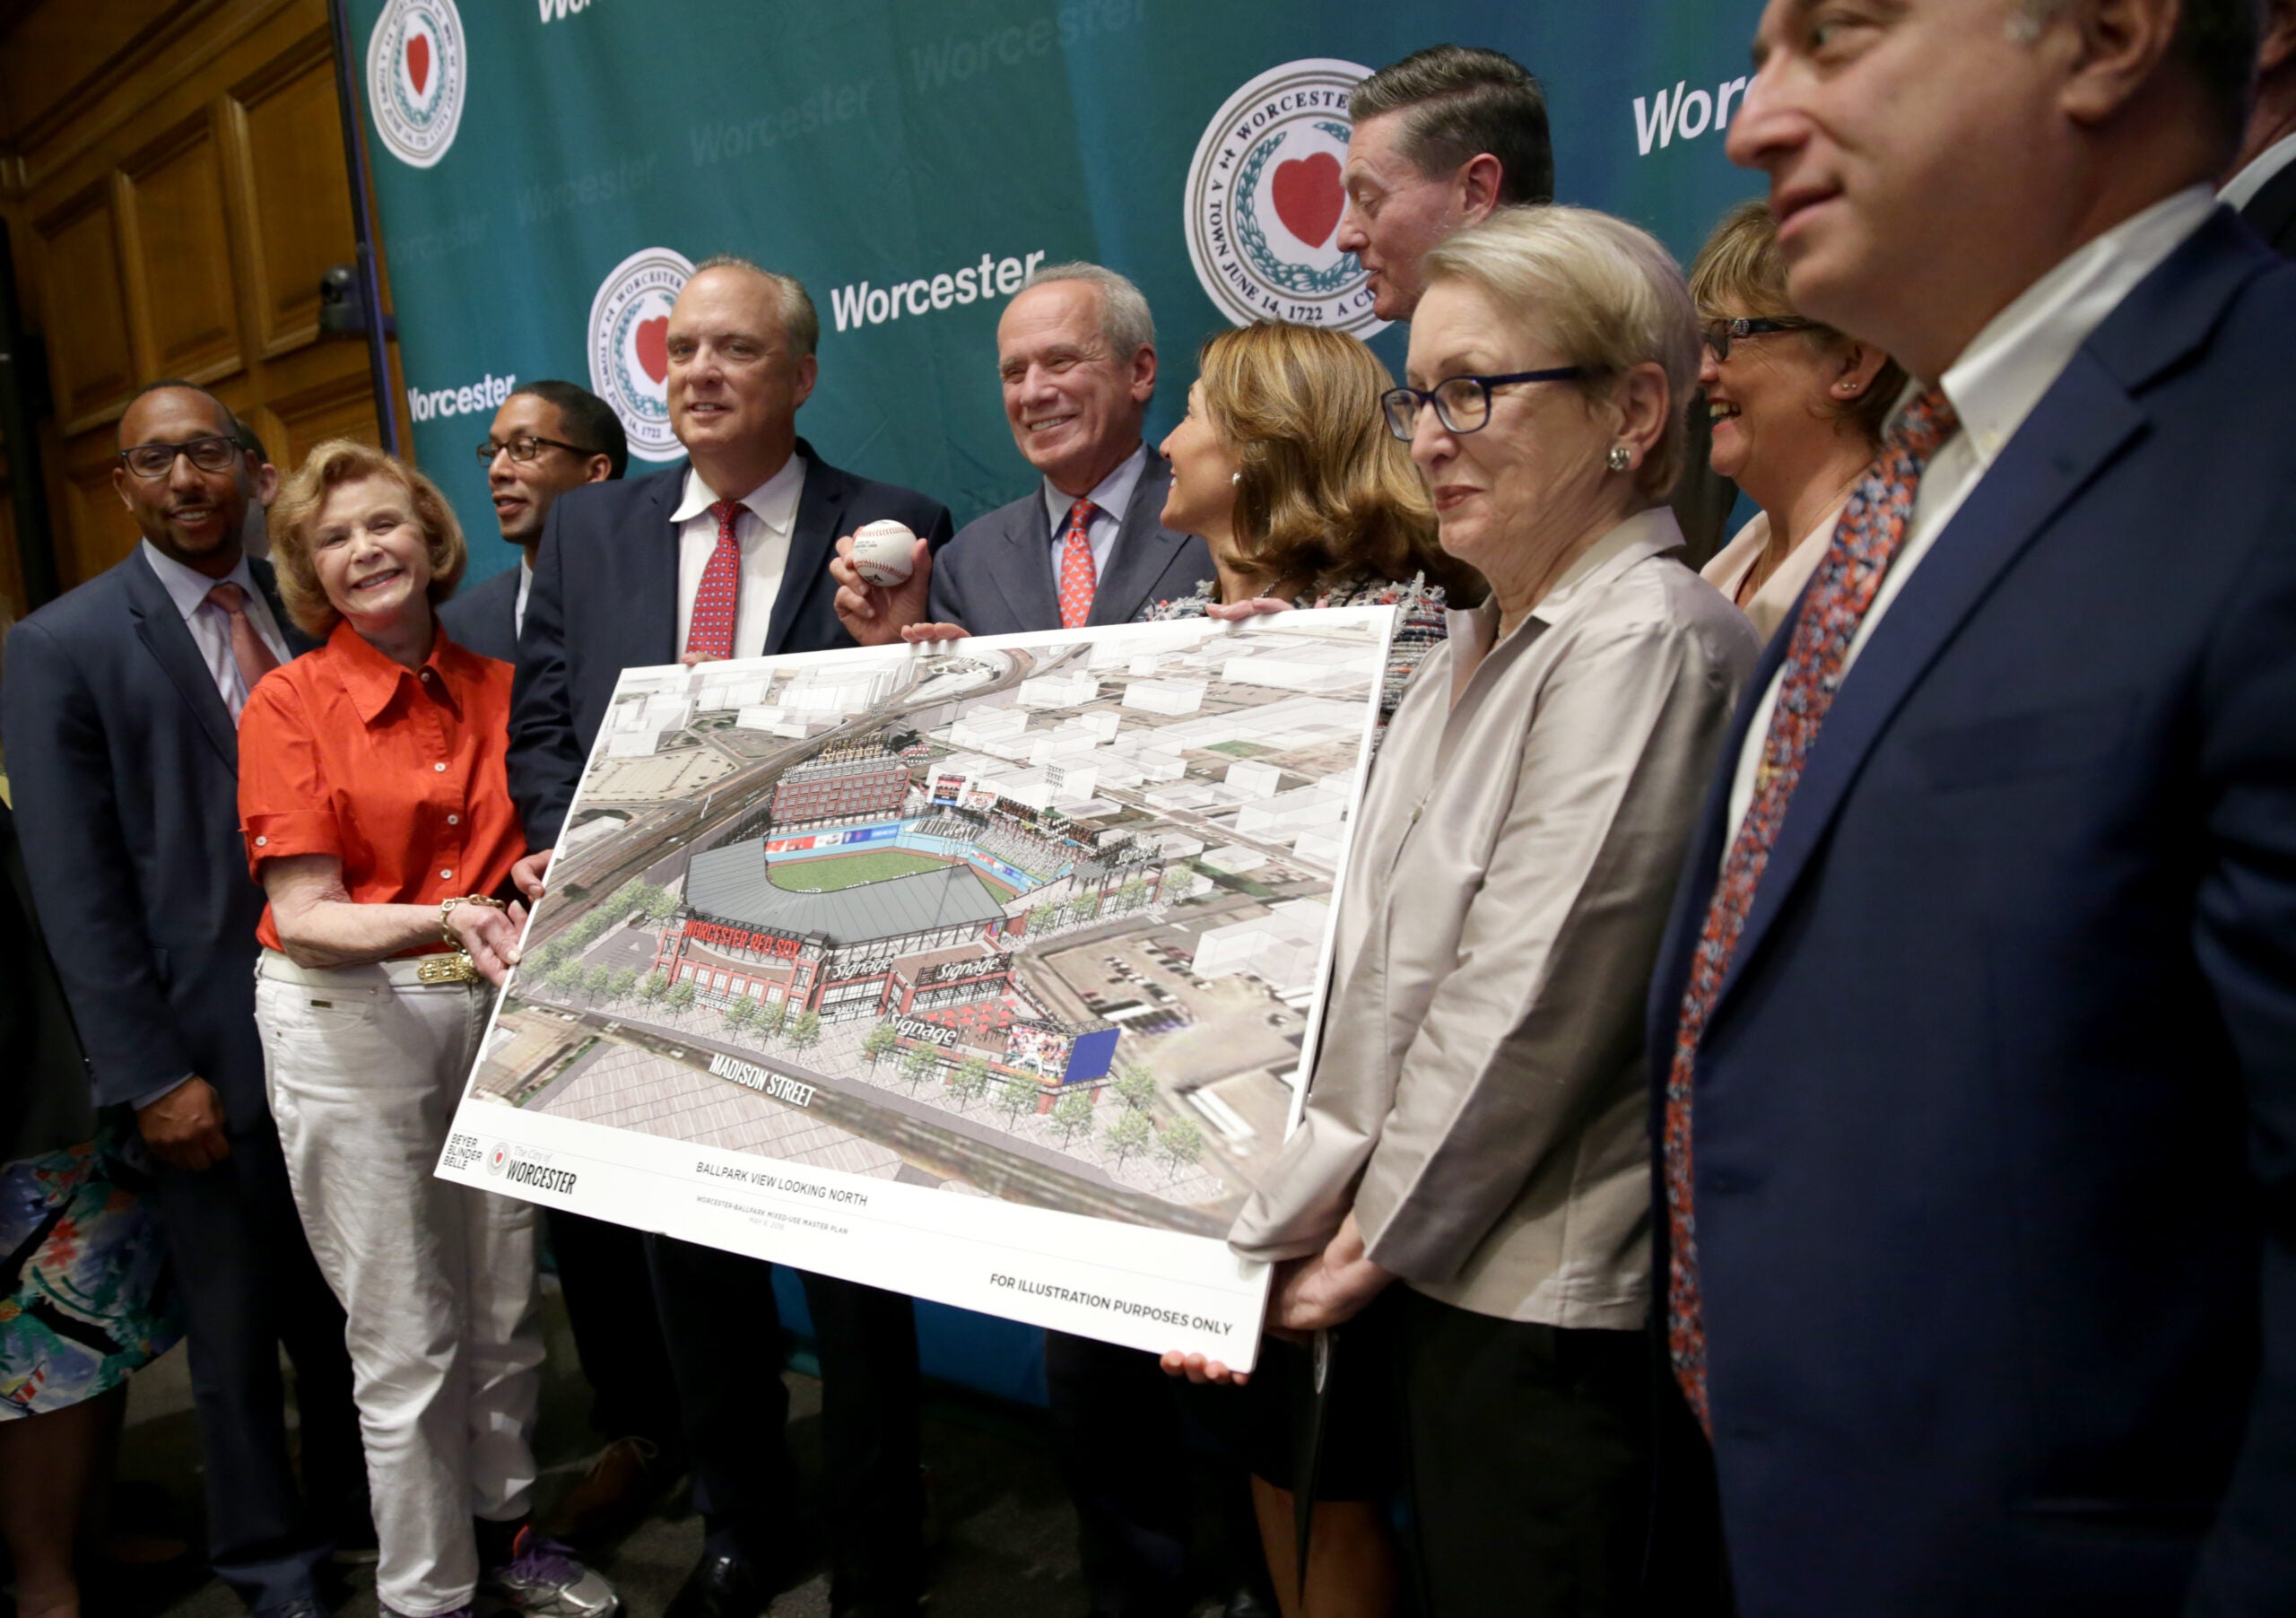 Pawtucket mayor upbeat about chances for keeping PawSox - The